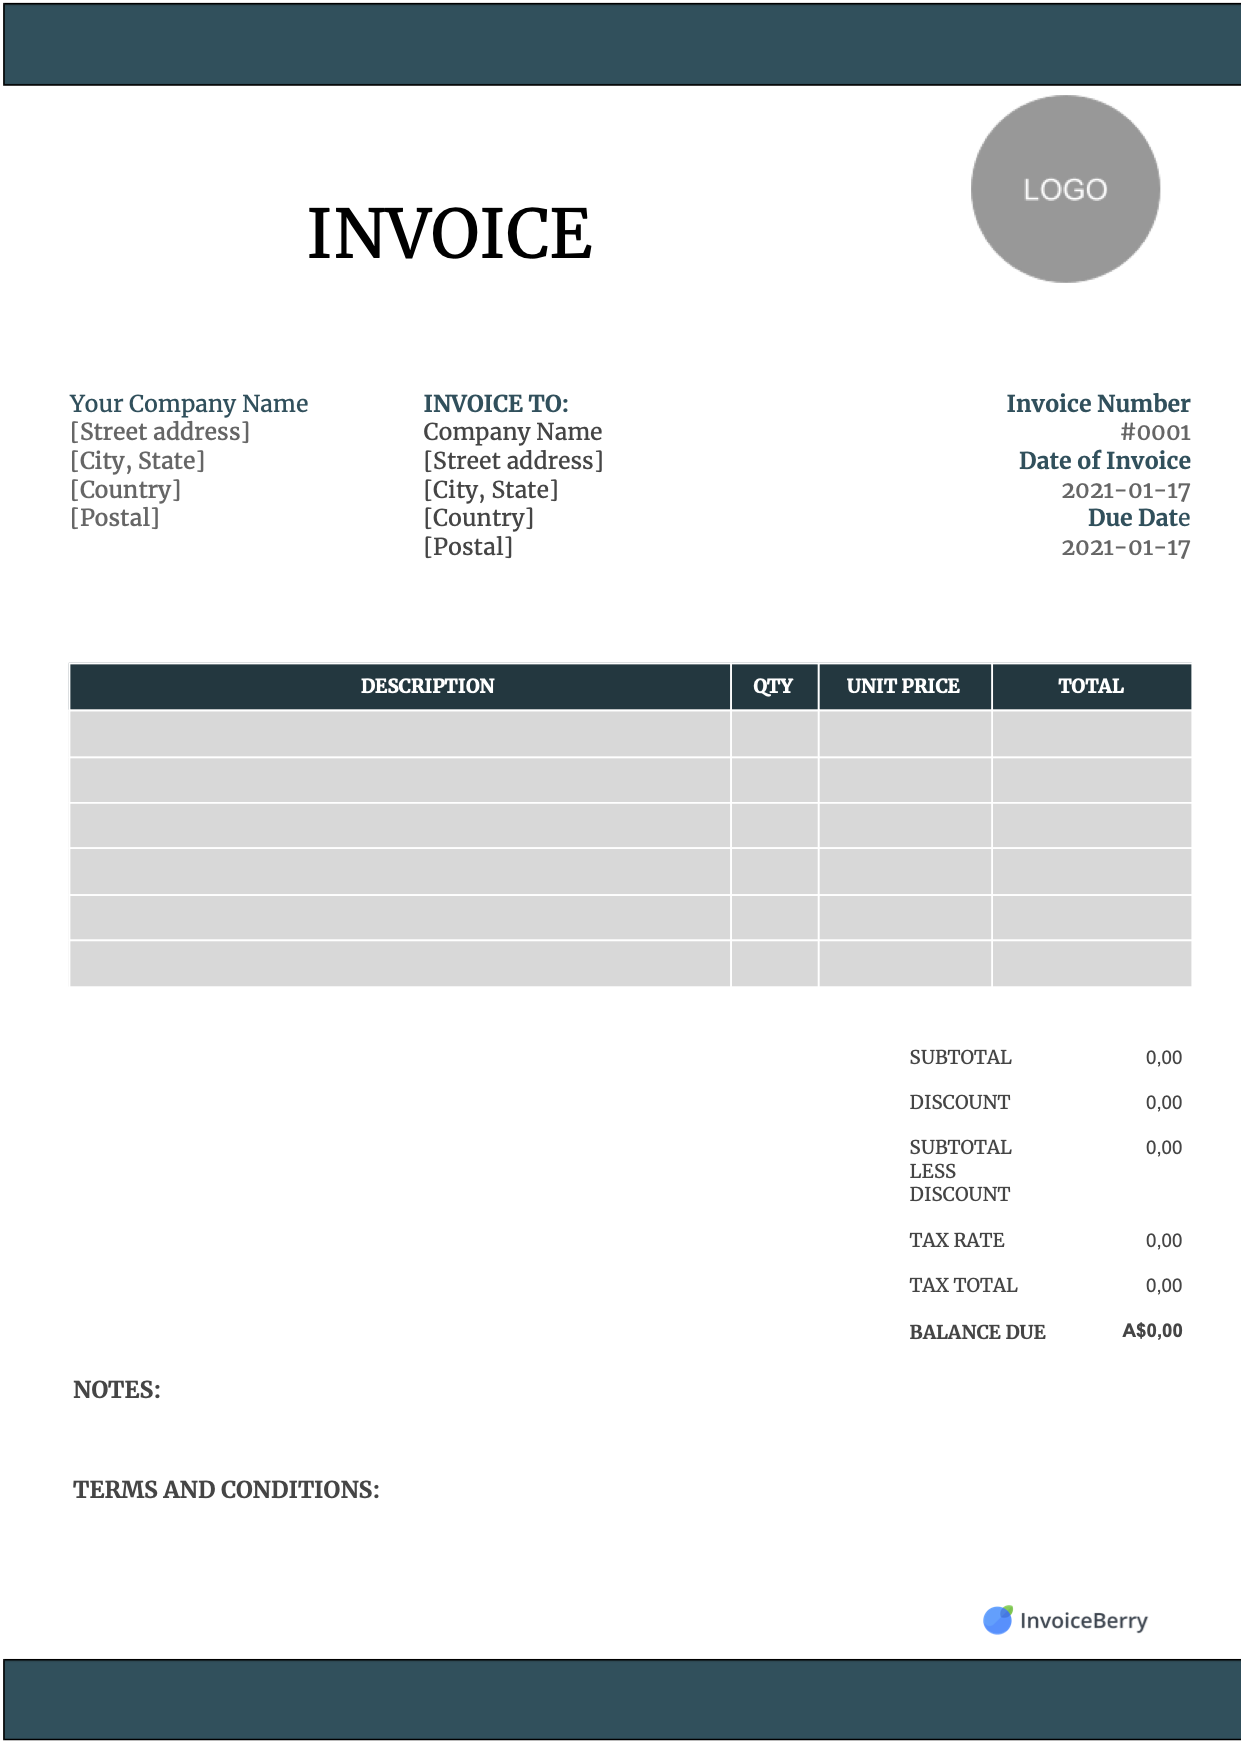 Free Invoice Templates Download All Formats and Industries InvoiceBerry